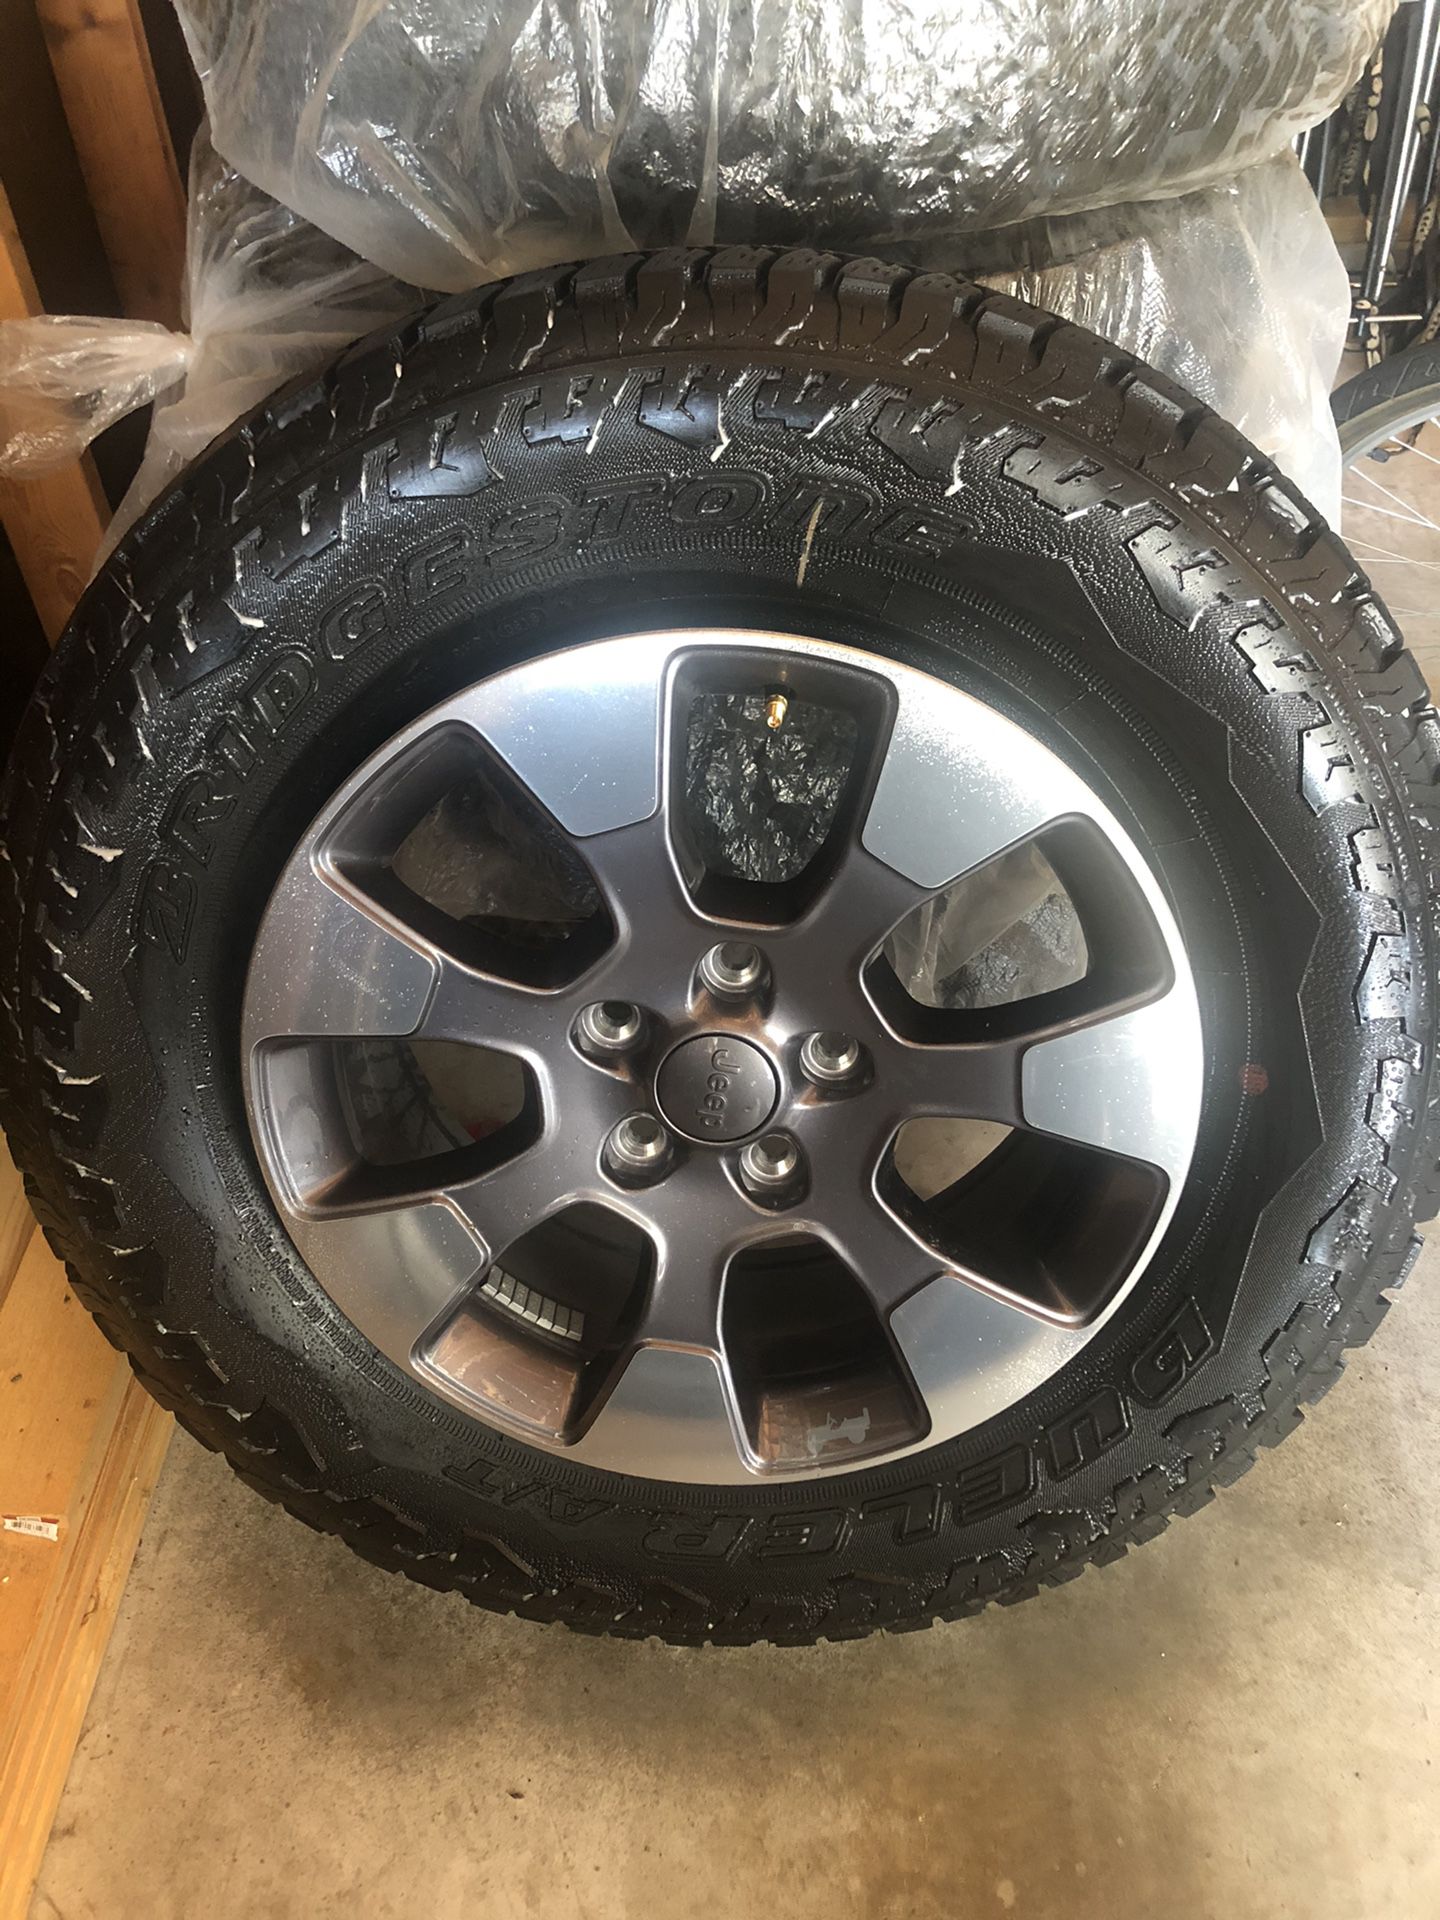 2018 Jeep Wrangler JL Wheels and tires